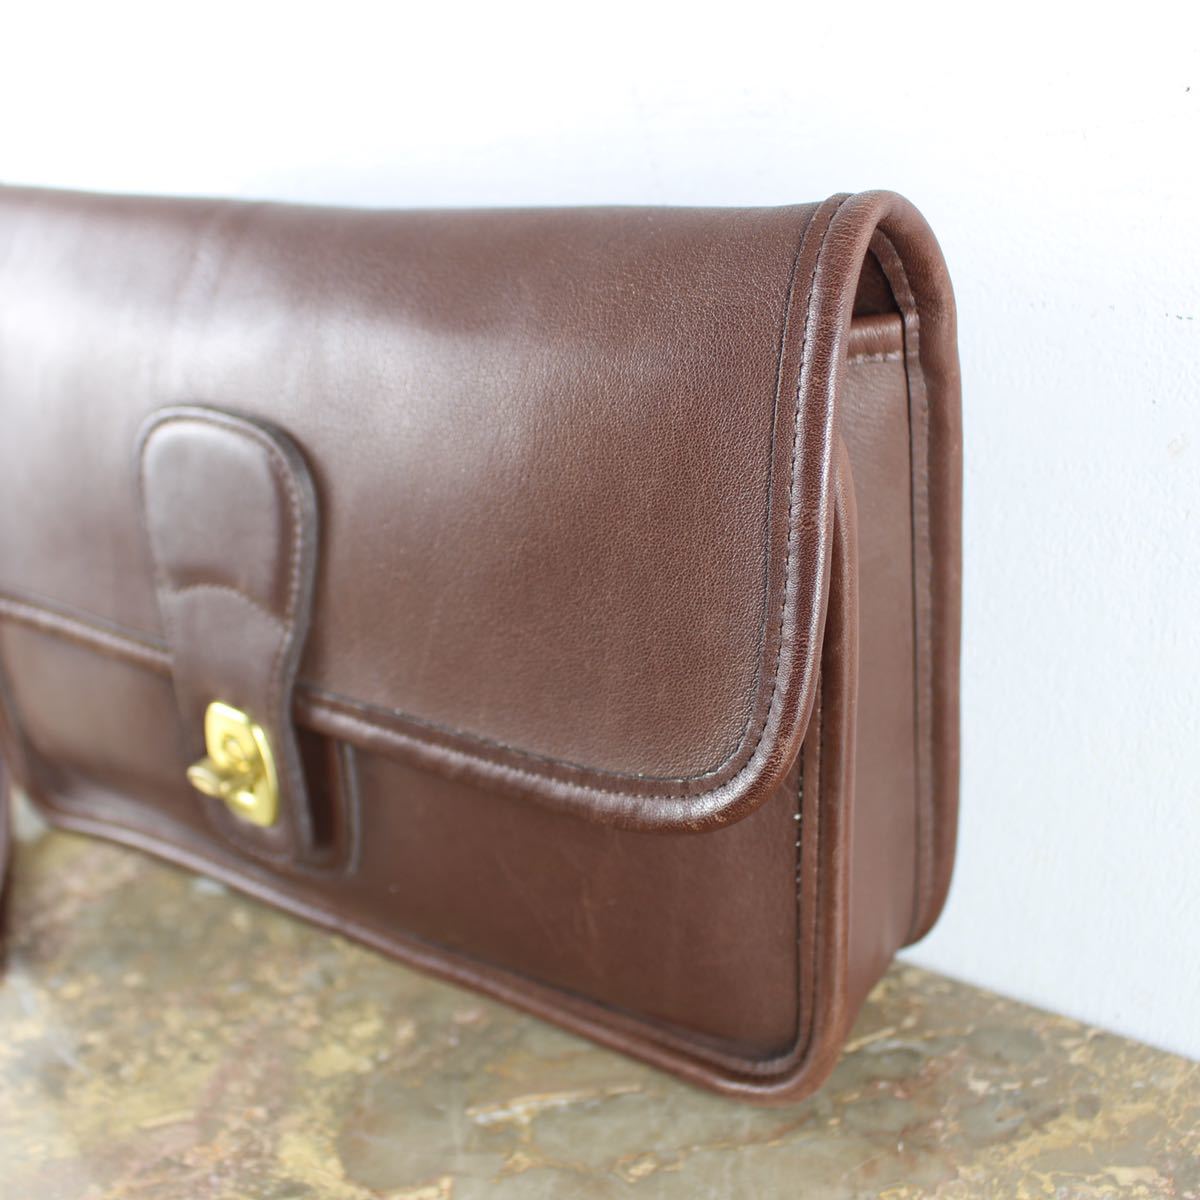 OLD COACH TURN LOCK LEATHER CLUTCH BAG MADE IN USA/オールドコーチターンロックレザークラッチバッグ_画像2